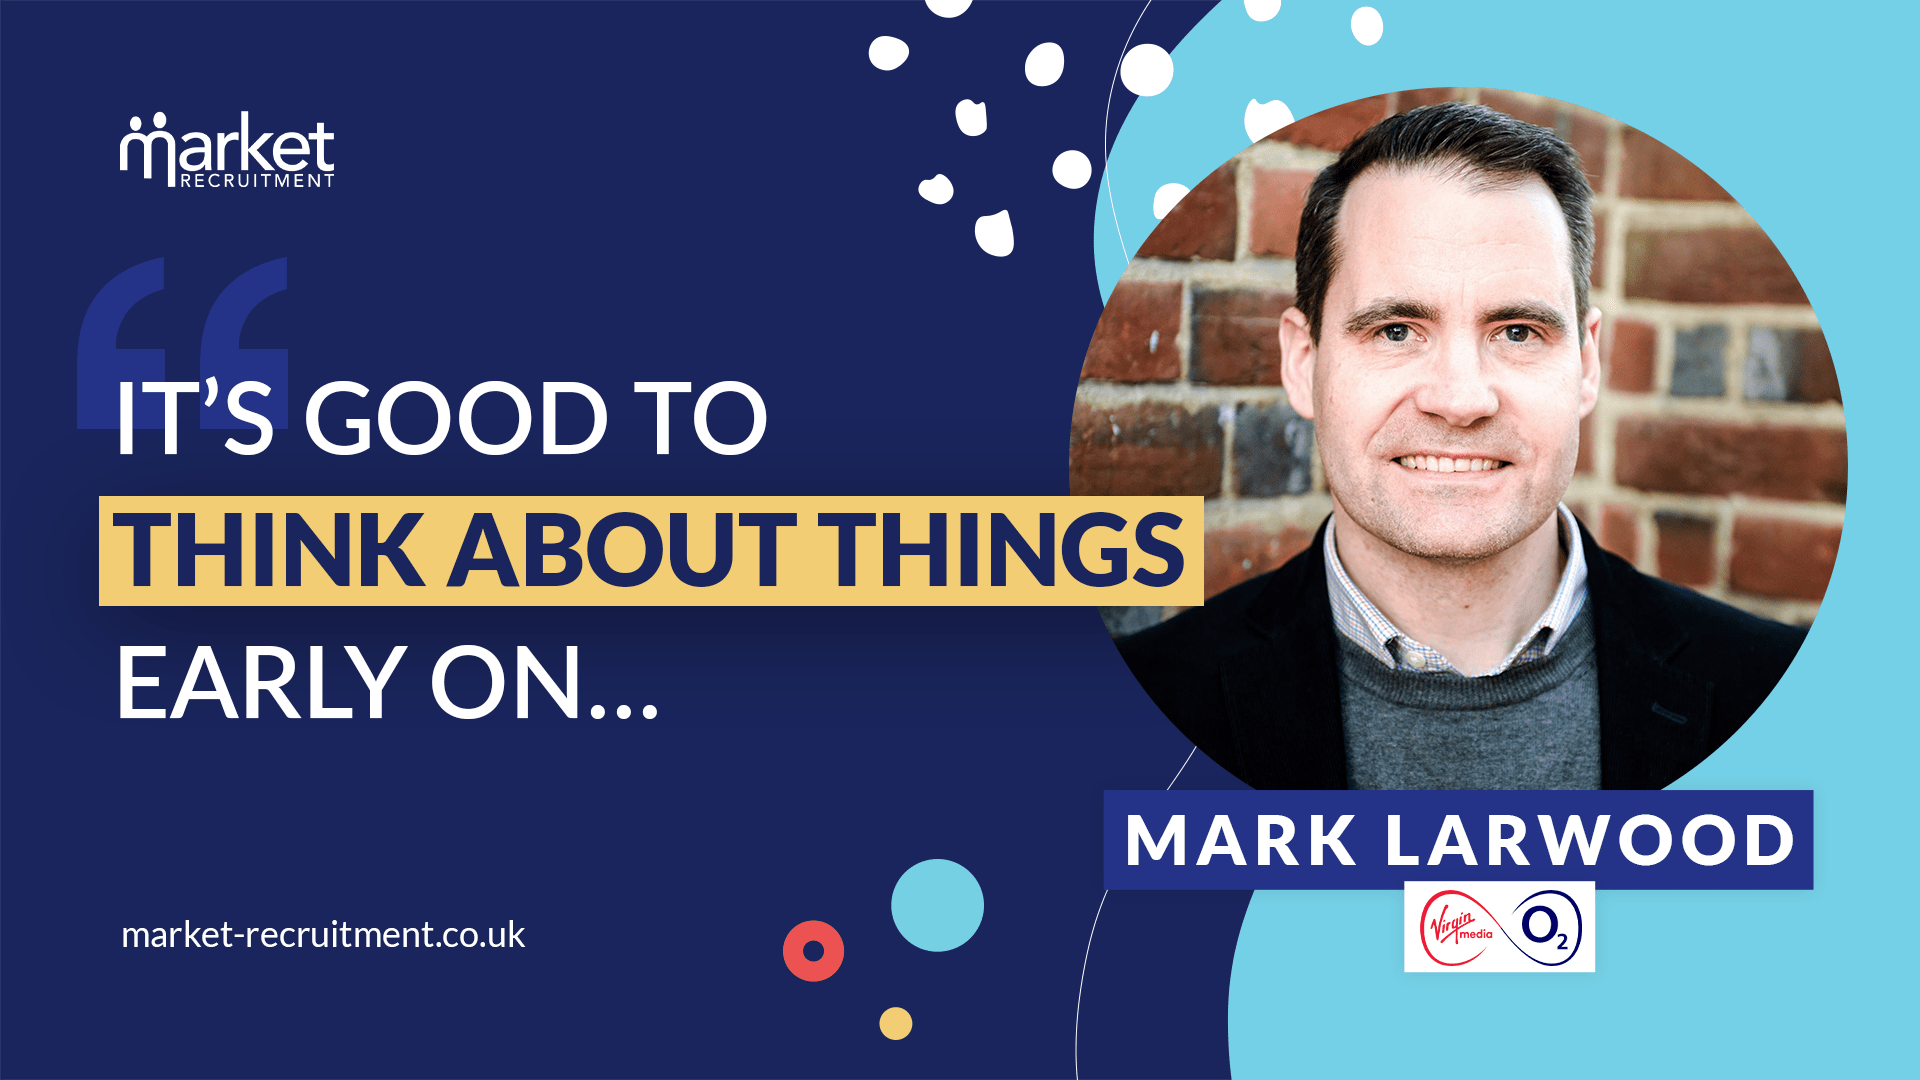 mark larwood discusses merits of being a specialist b2b marketer